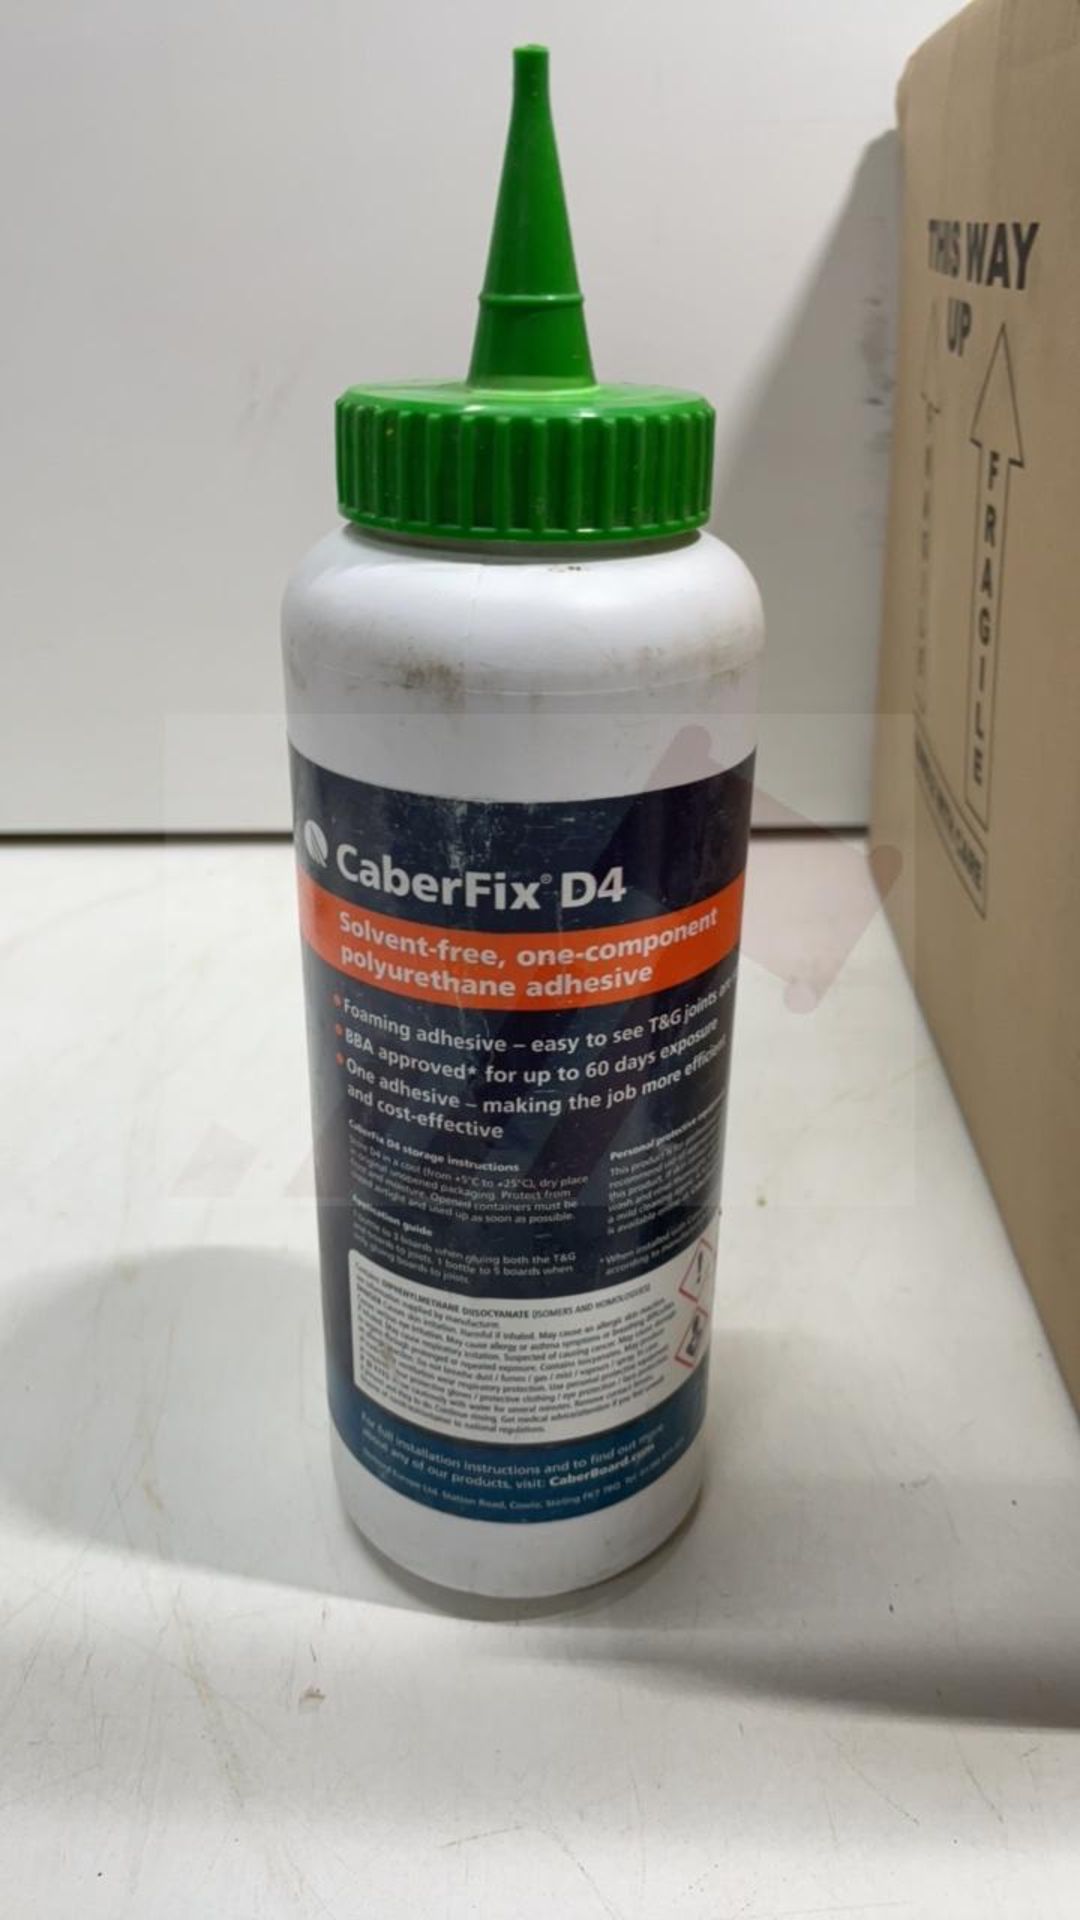 54X Caberfix D4 solvent free adhesive Bottles - Image 3 of 3